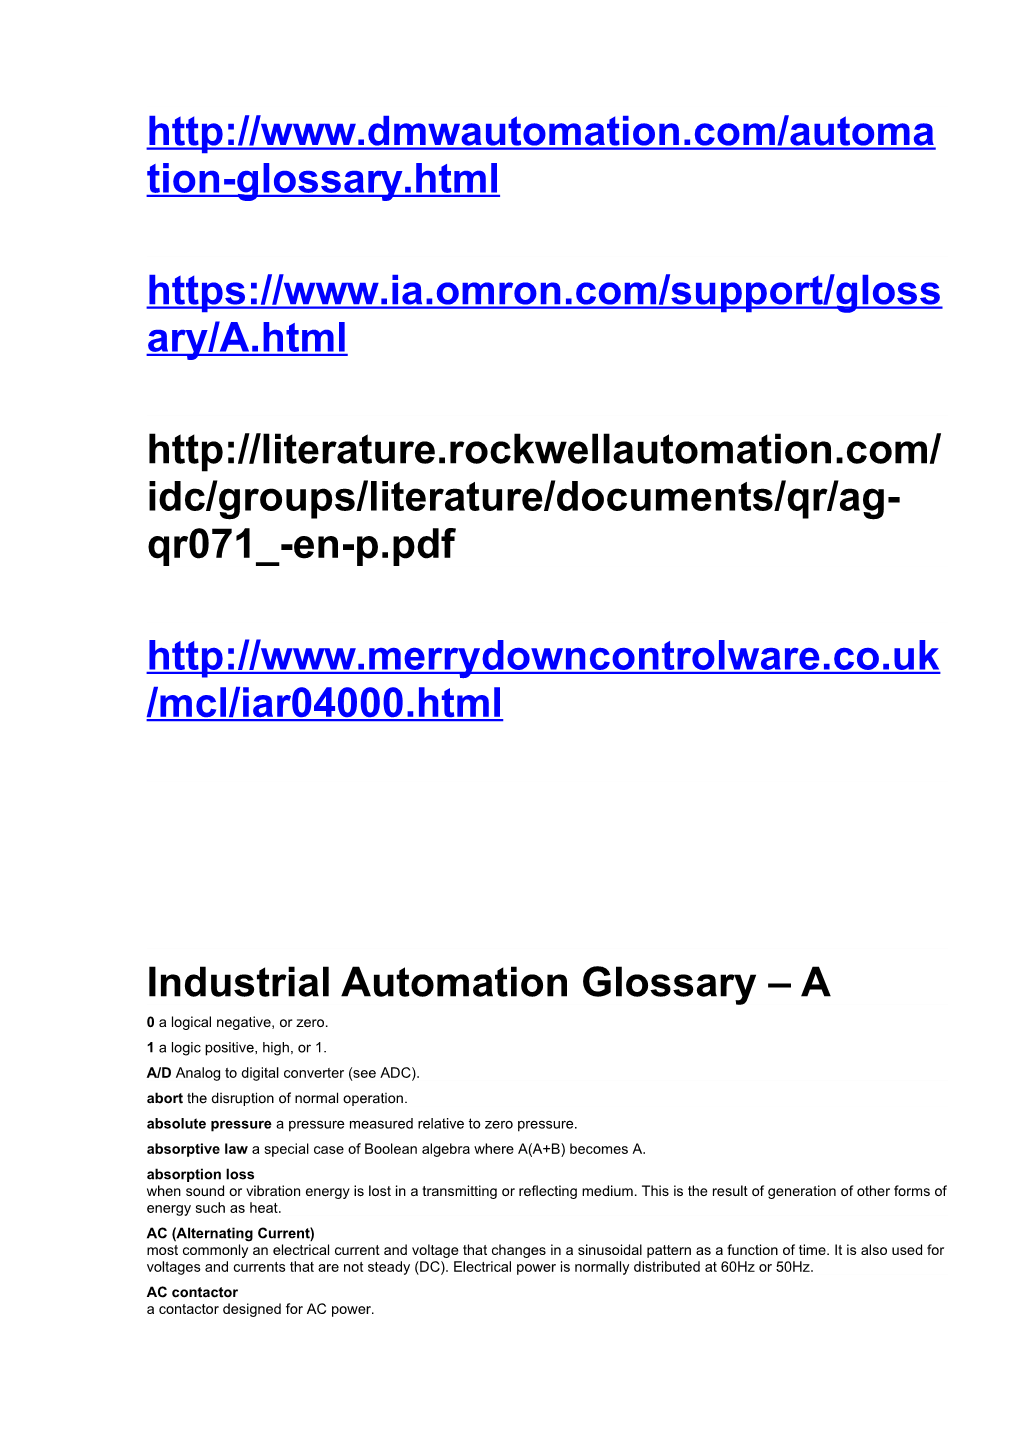 Industrial Automation Glossary A